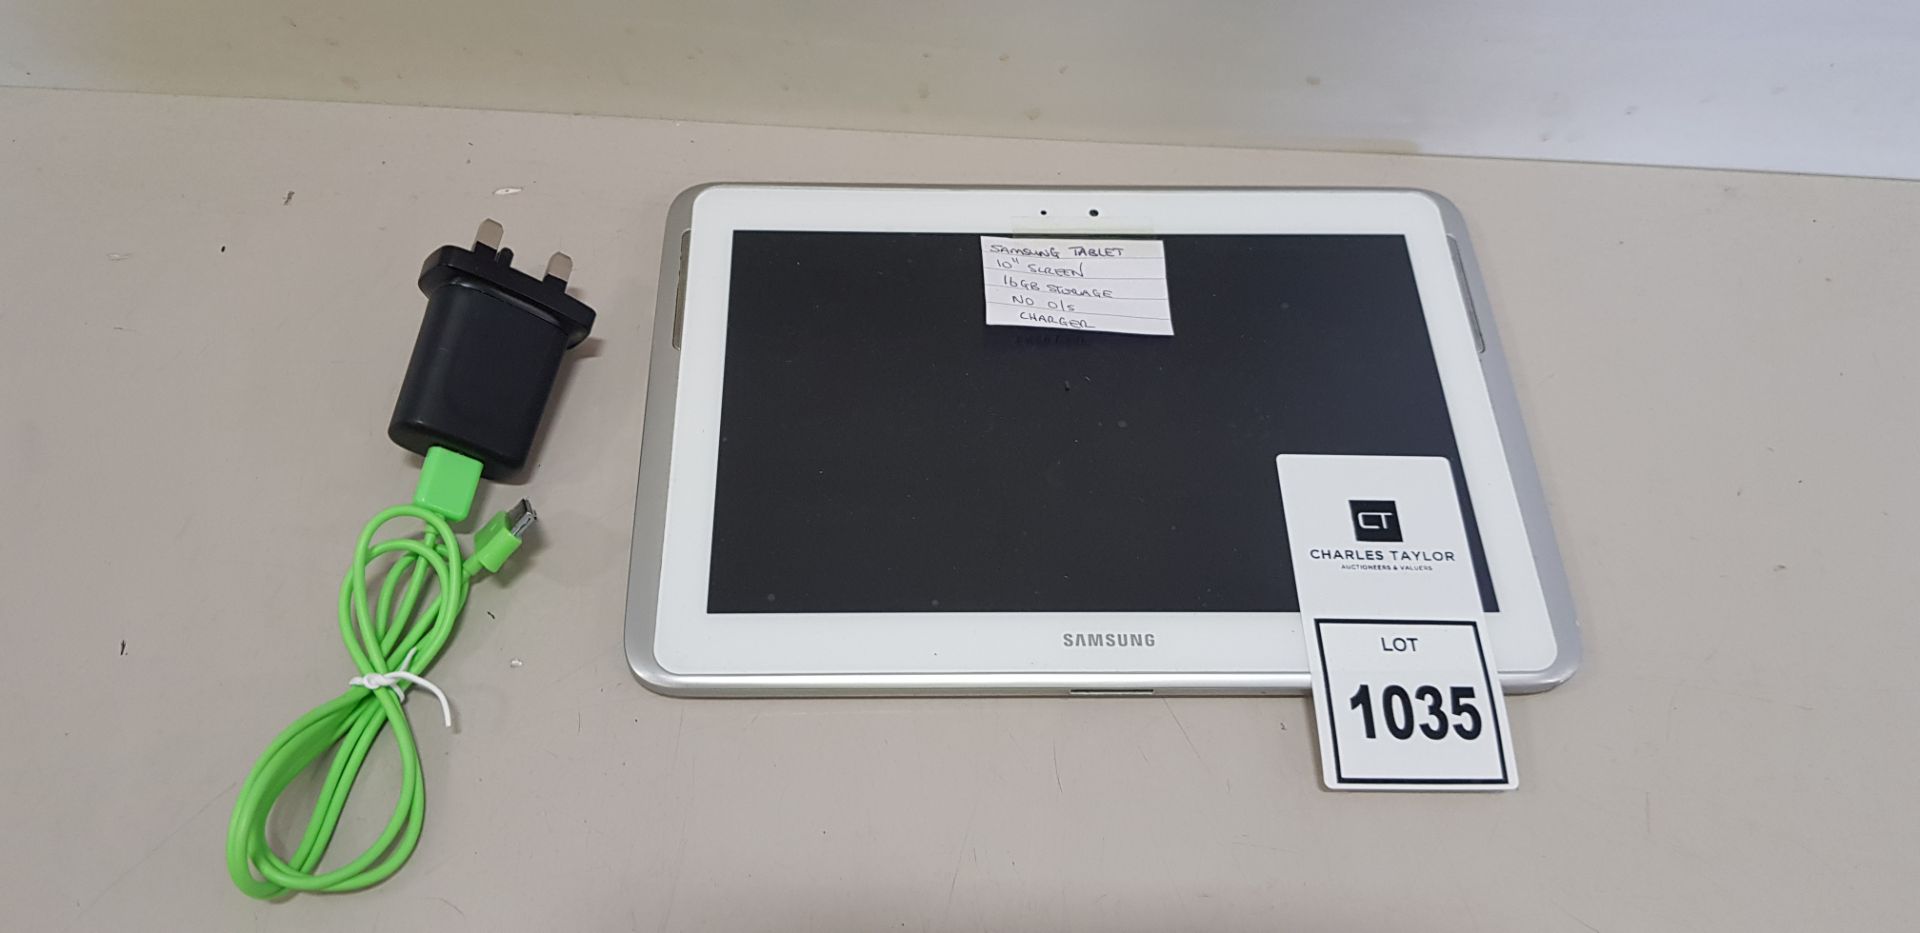 SAMSUNG TABLET - 10 SCREEN - 16GB STORAGE - NO O/S - COMES WITH CHARGER